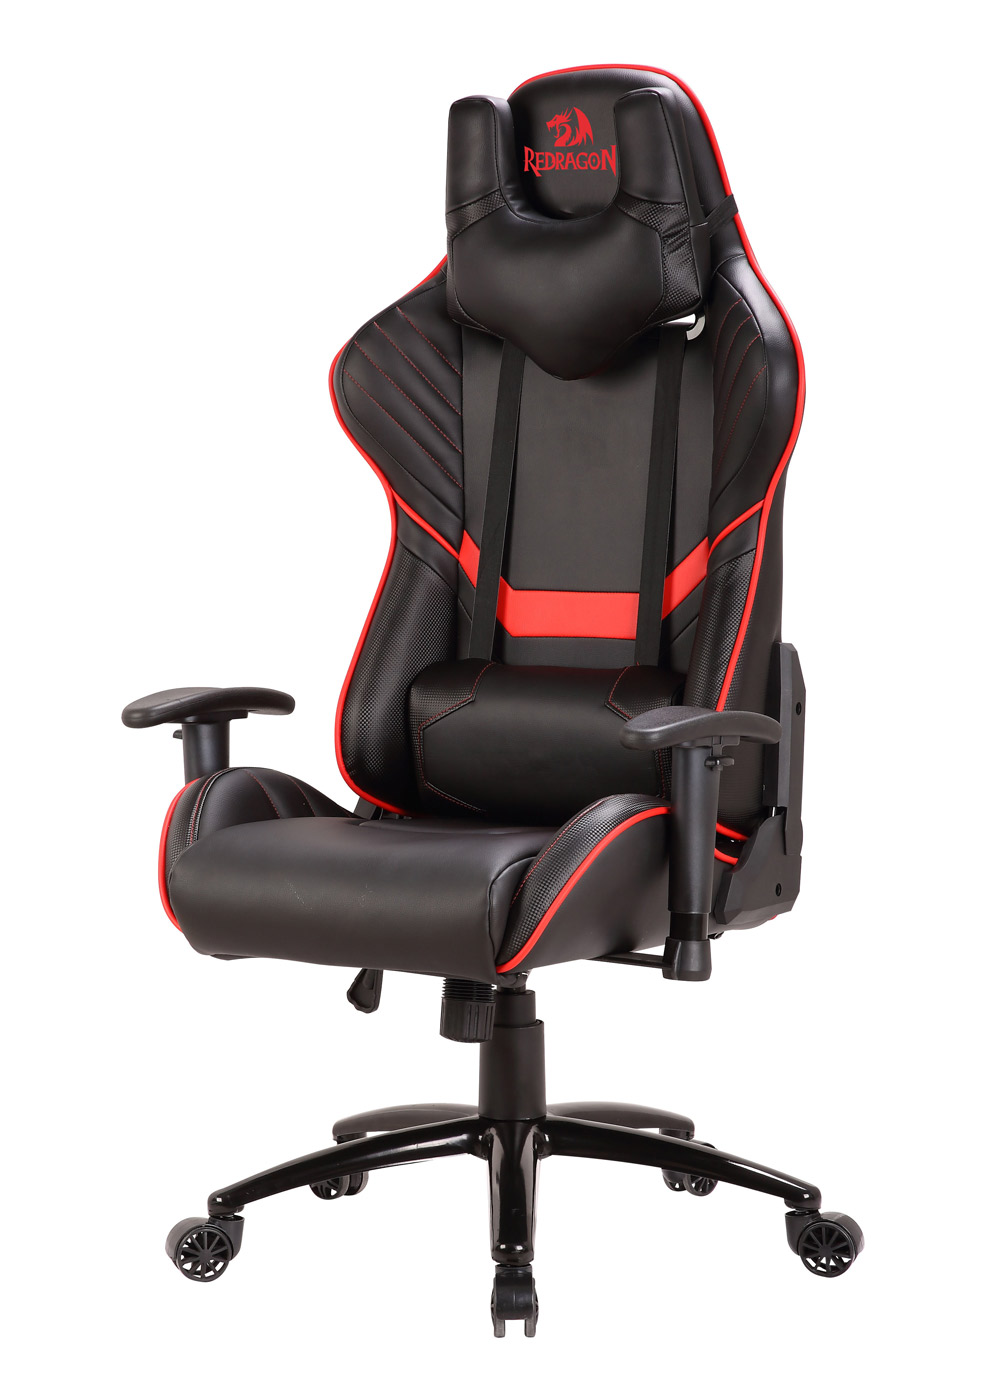 Redragon COEUS Gaming Chair Black and Red Best Deal